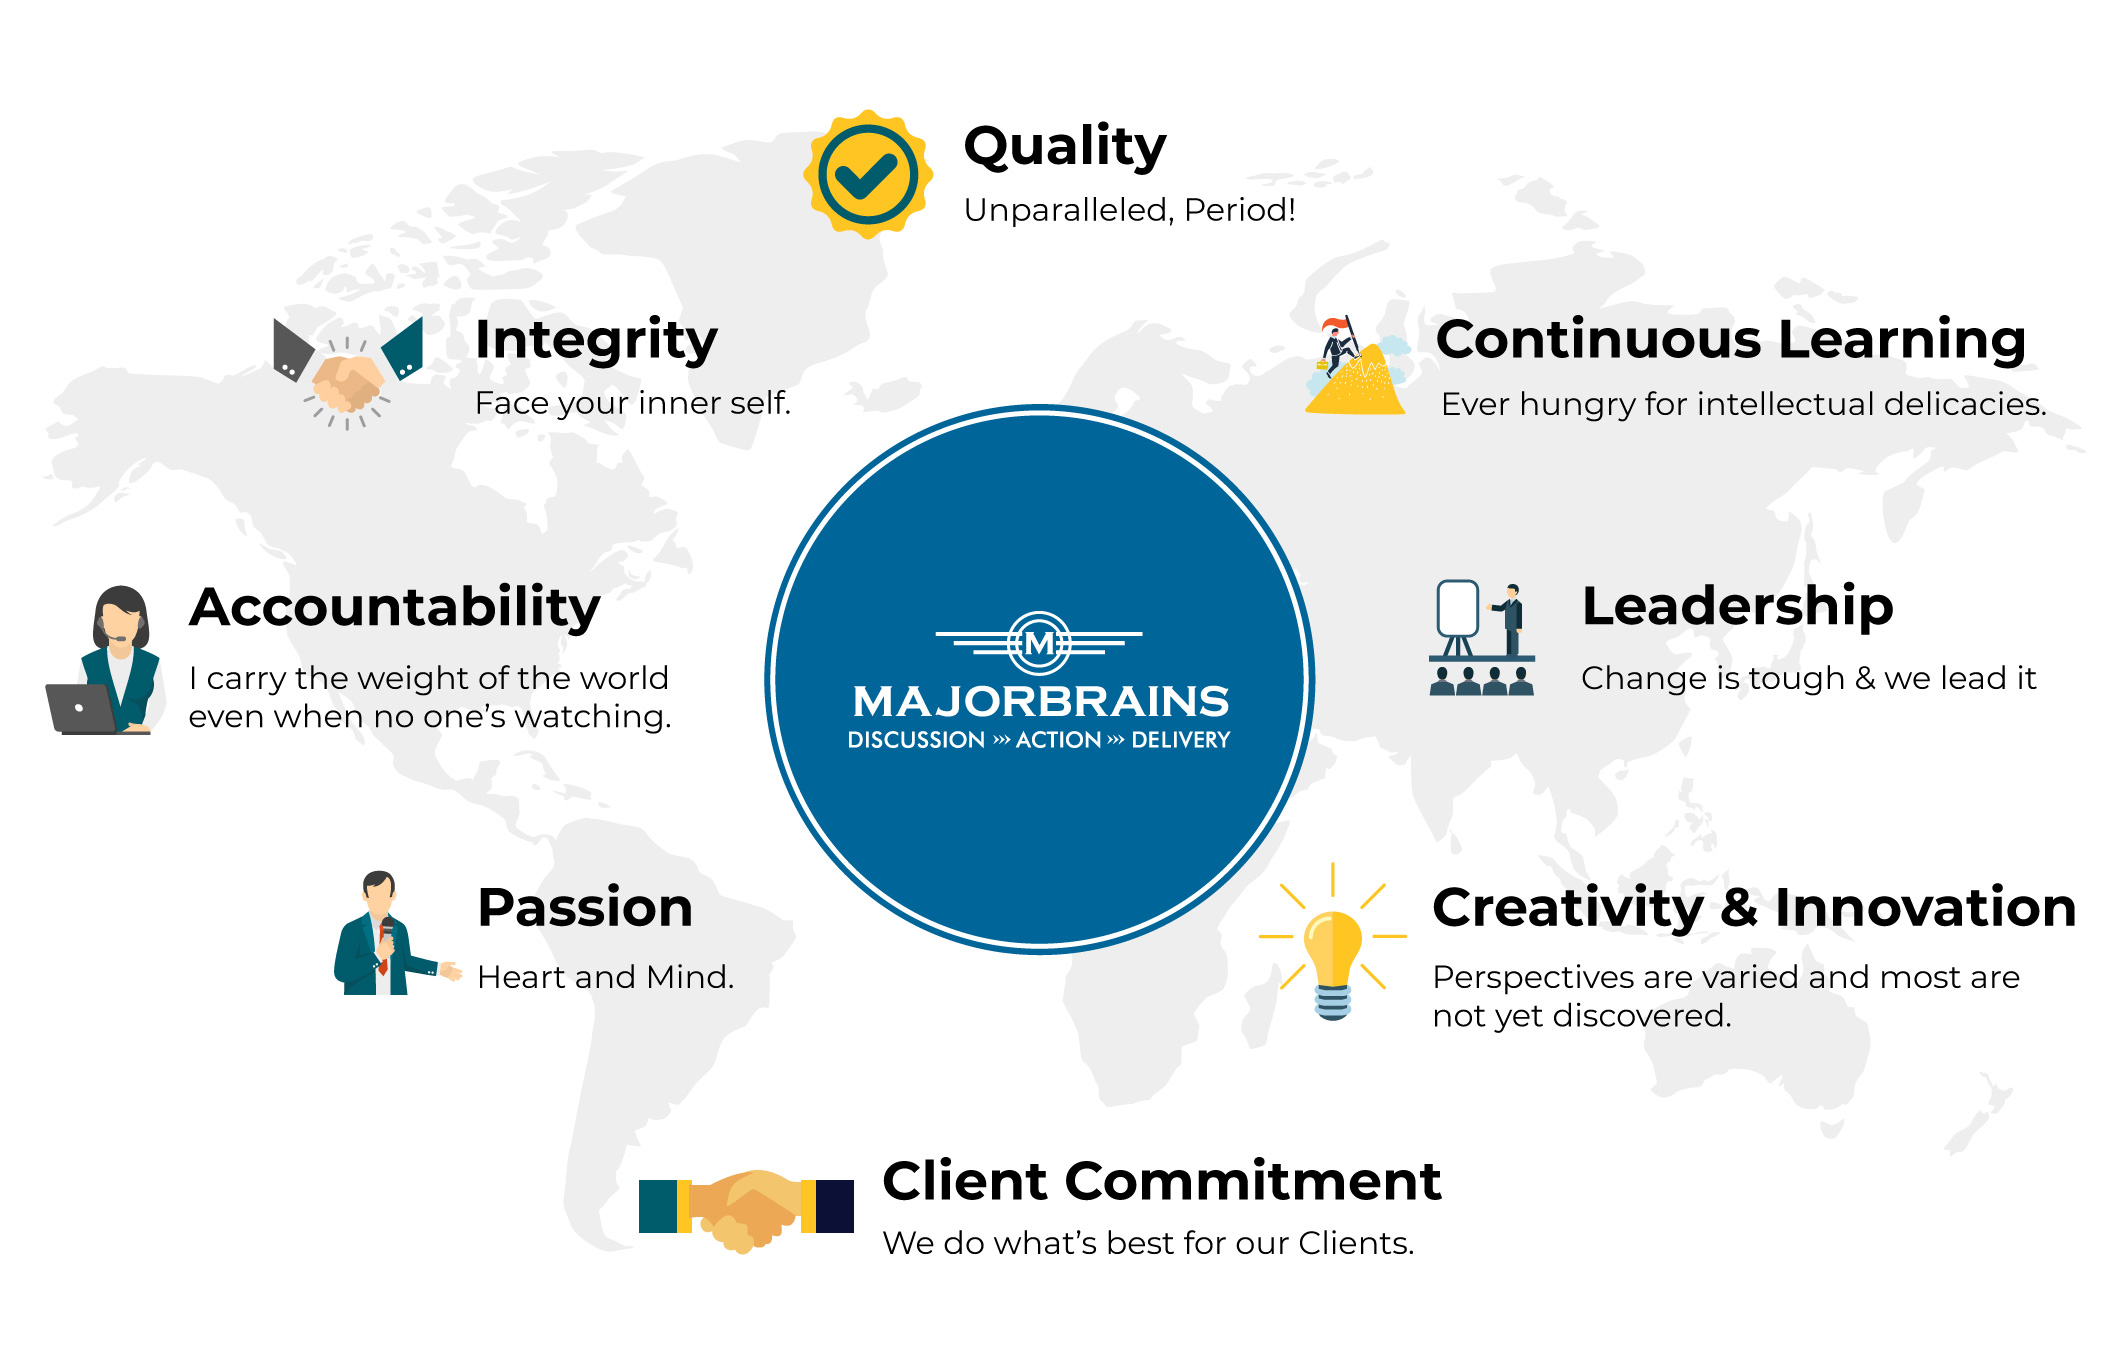 MajorBrains believes in Quality, Integrity, Creativity, innovation and Clients' commitment